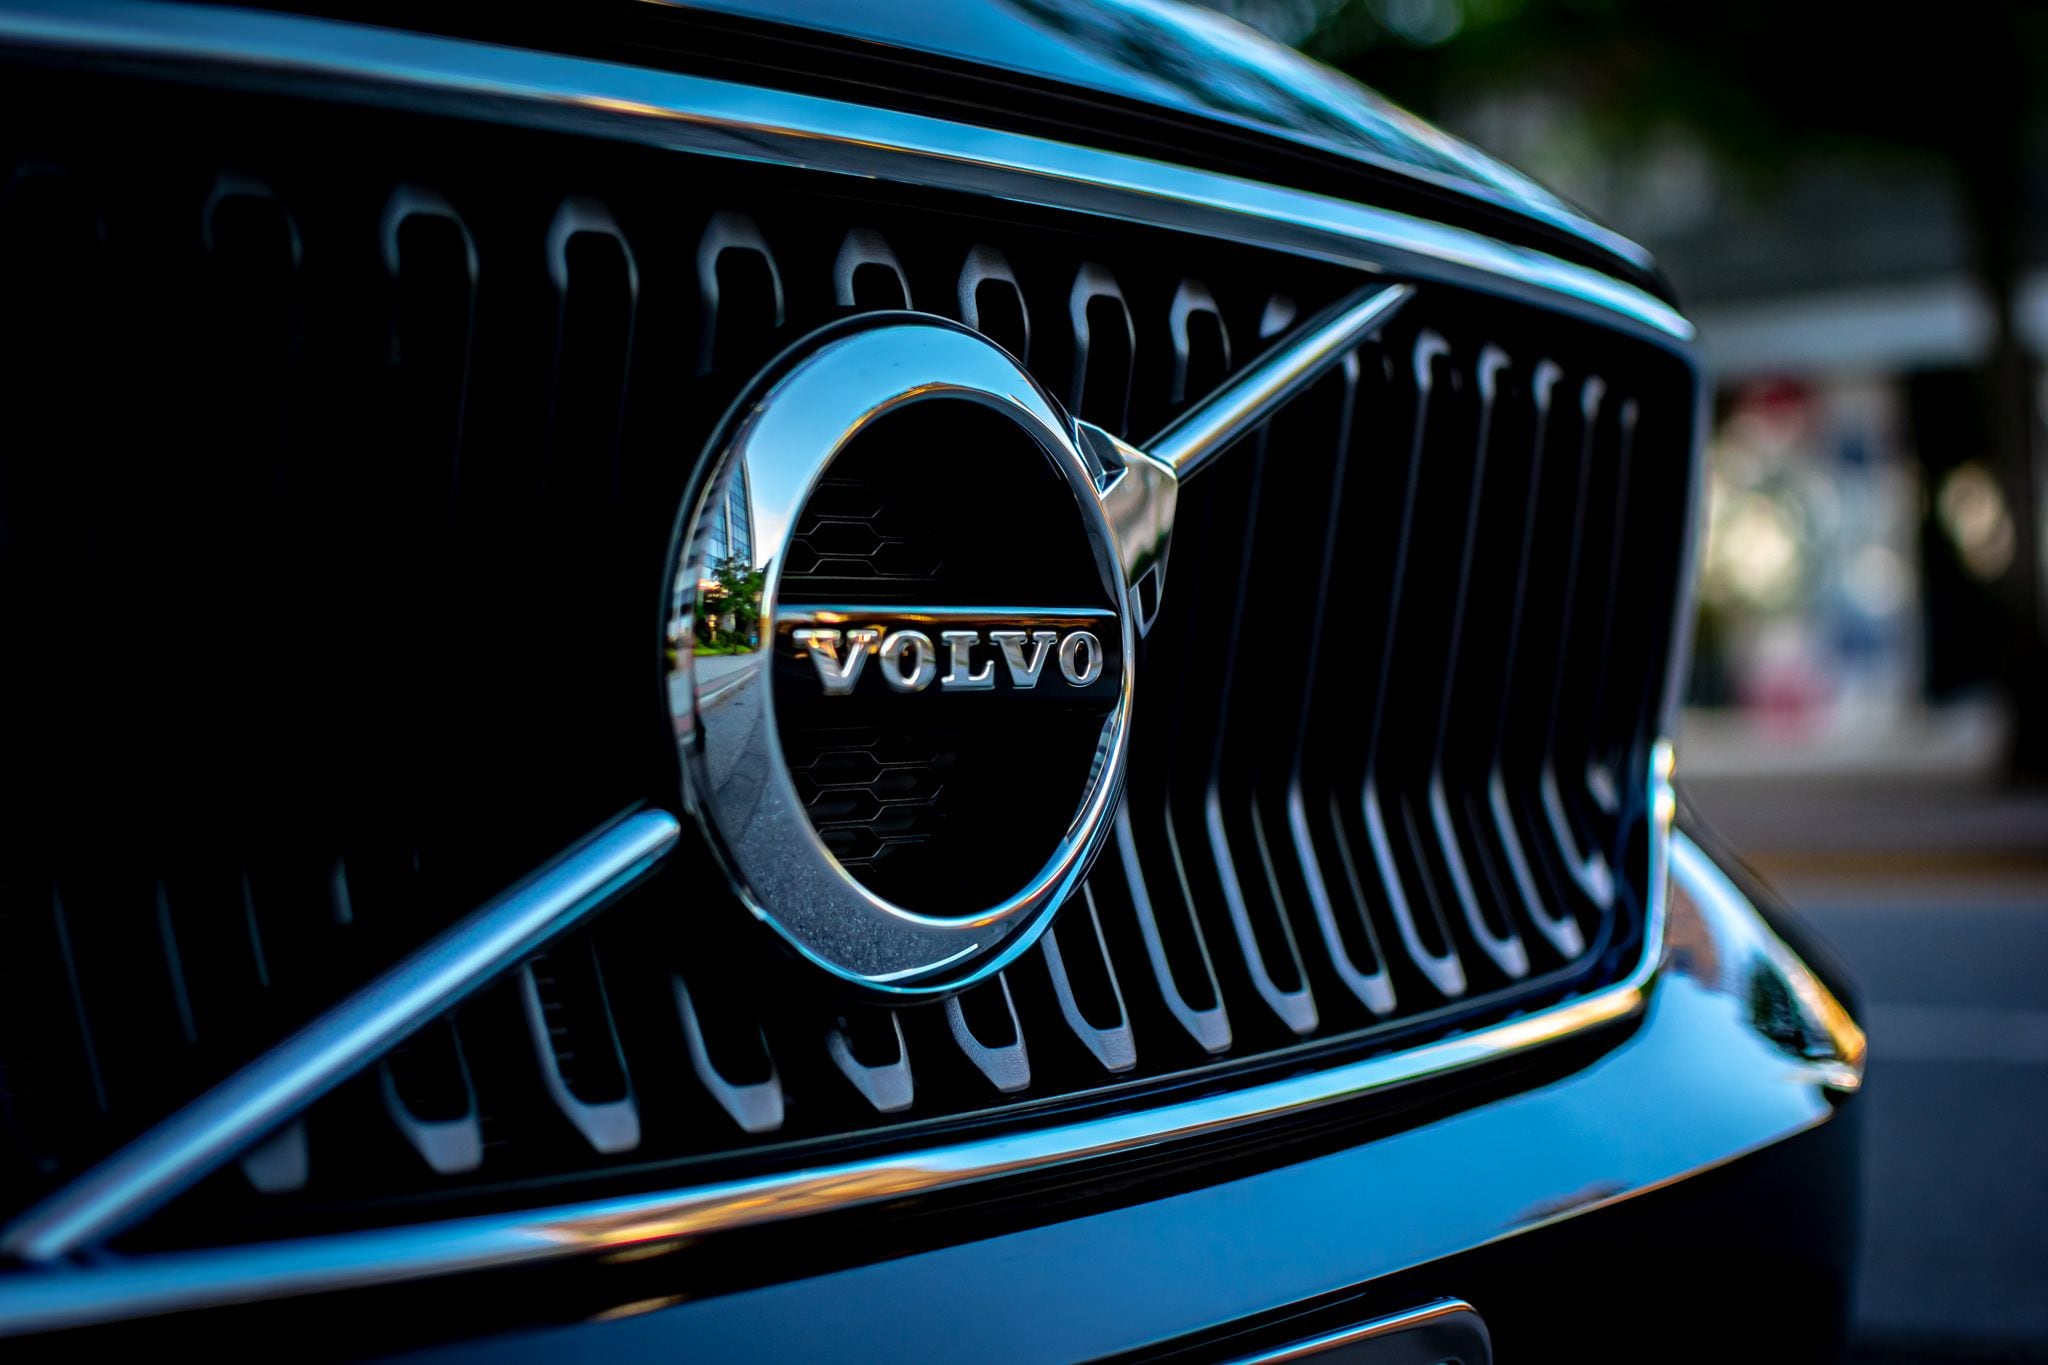 Volvo Cars White Plains, New Volvo and certified pre-owned car